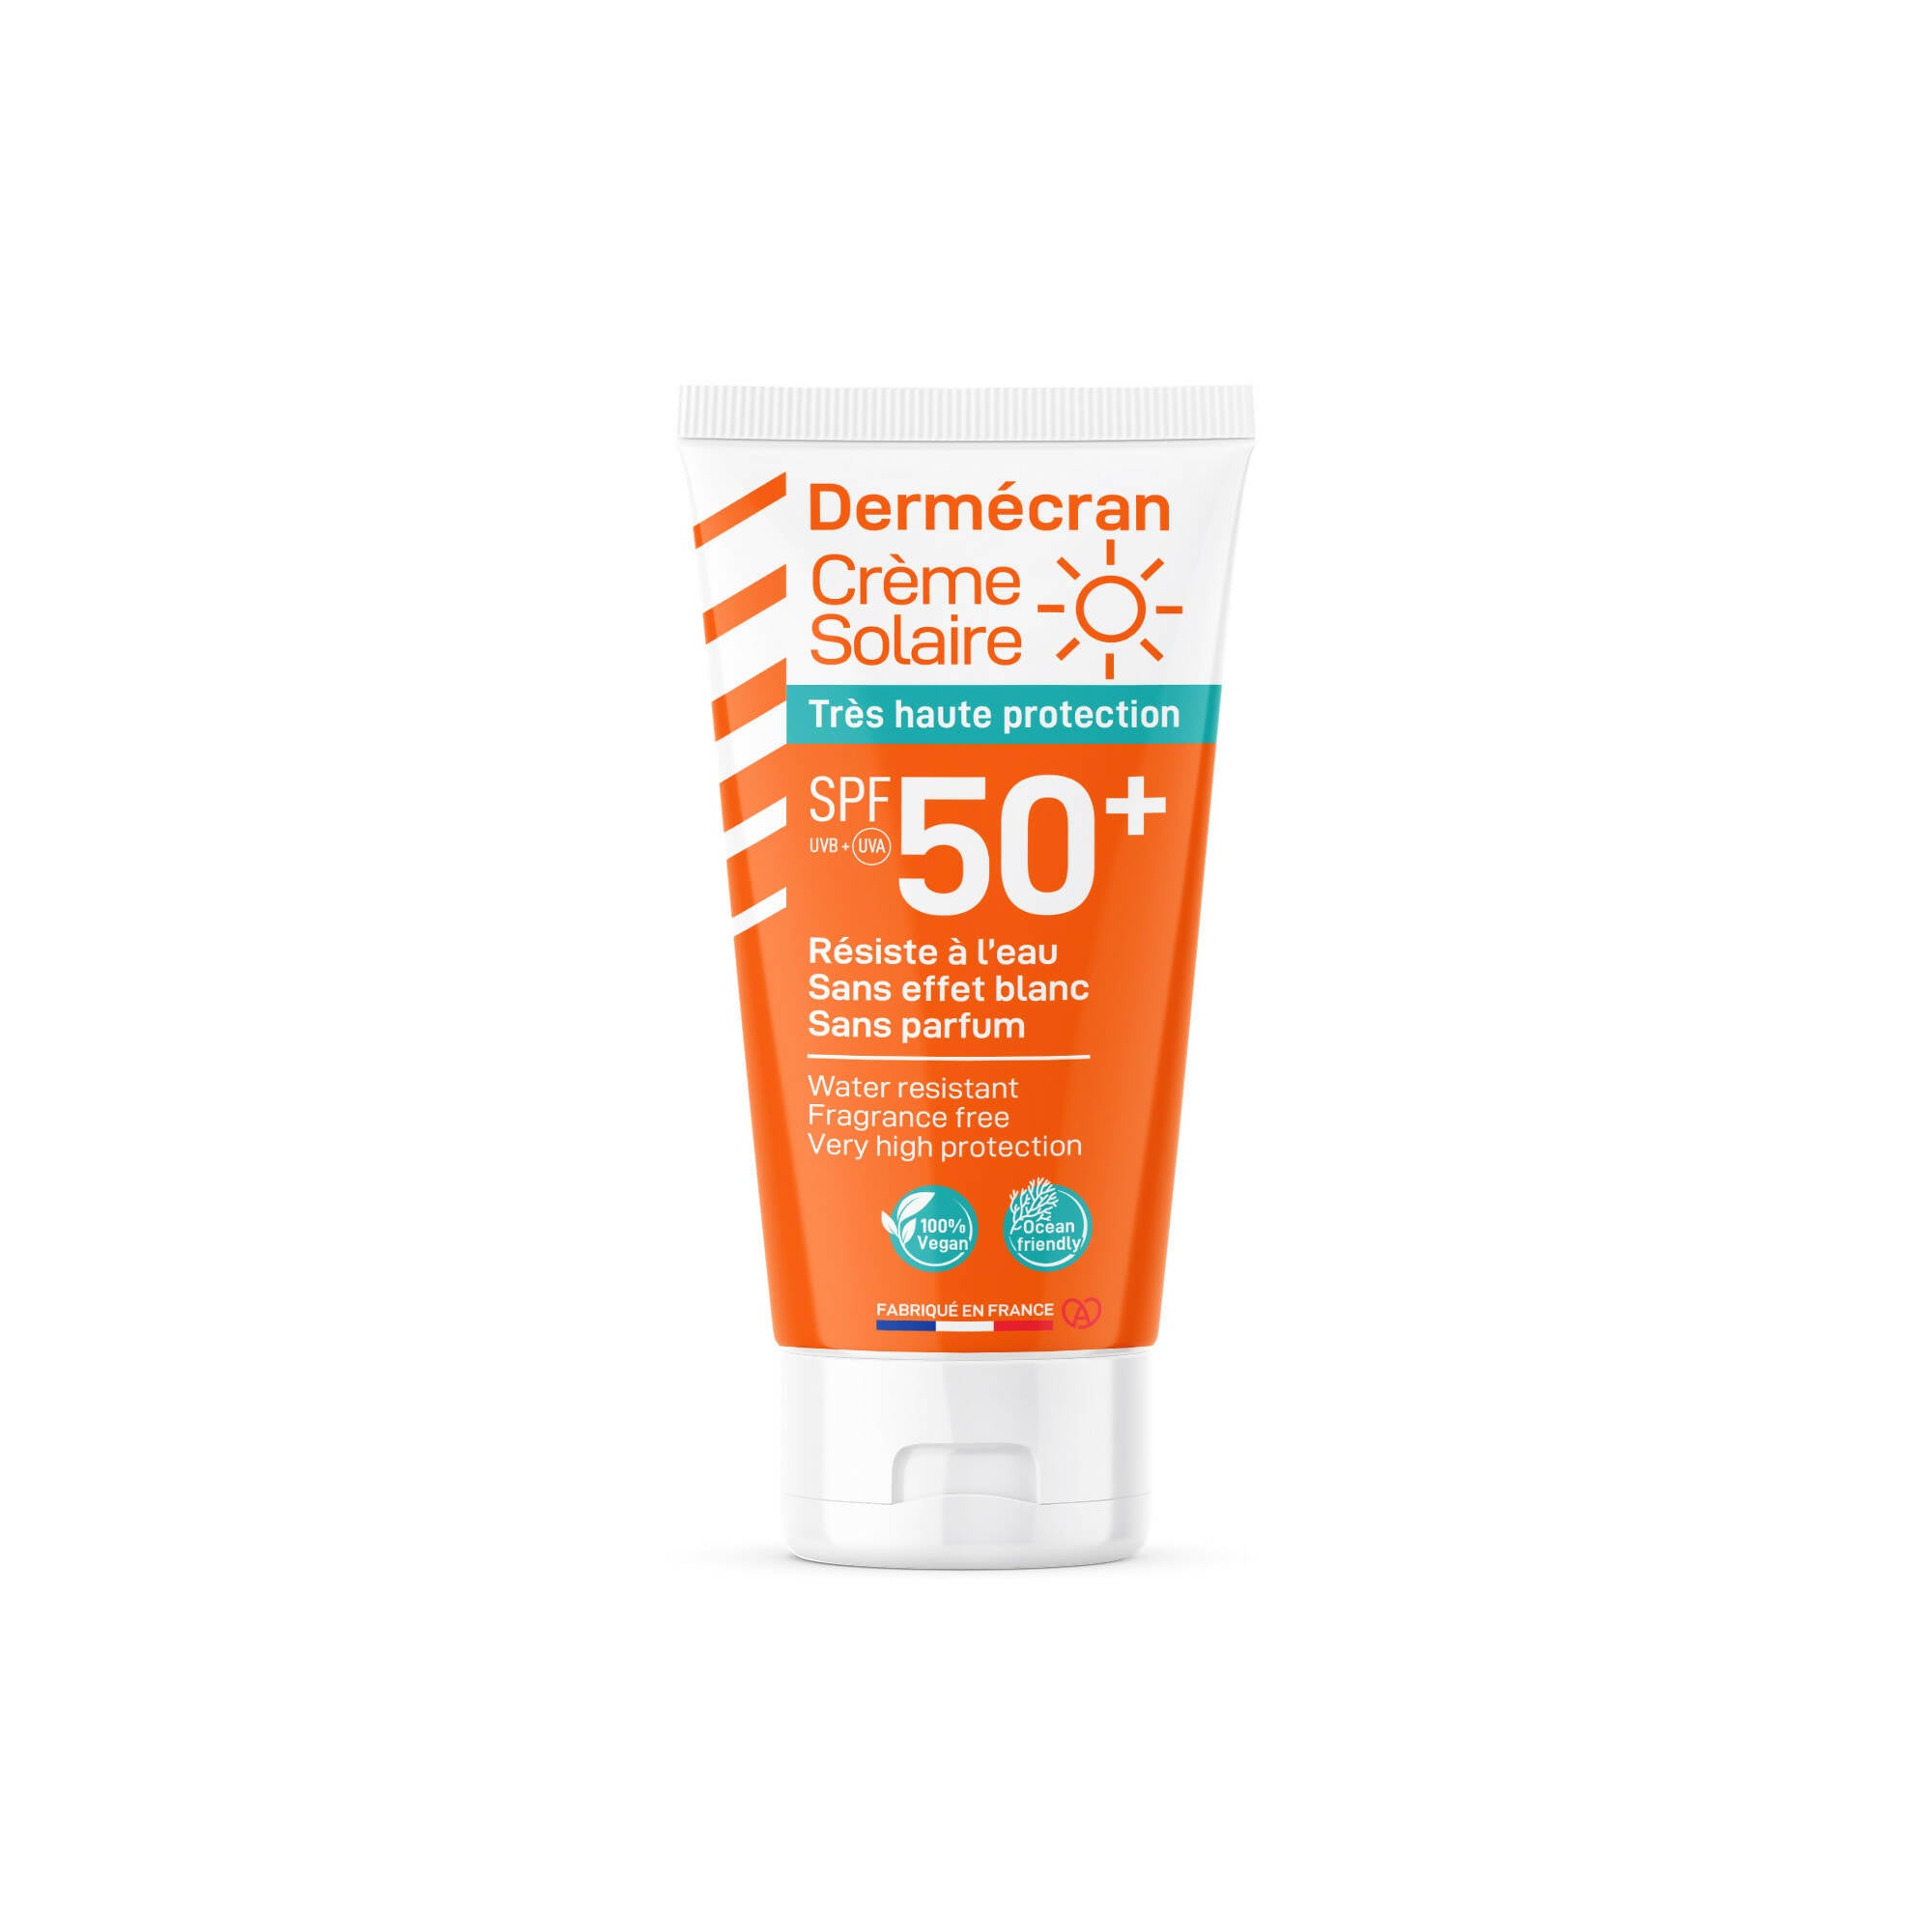 SORIFA - Complete box of 18 - Dermscreen - SPF50+ sun cream - Face and body - Vegan &amp; Ocean Friendly formula - Water resistant - For the whole family from 3 years old - Made in France - 50 ml tube